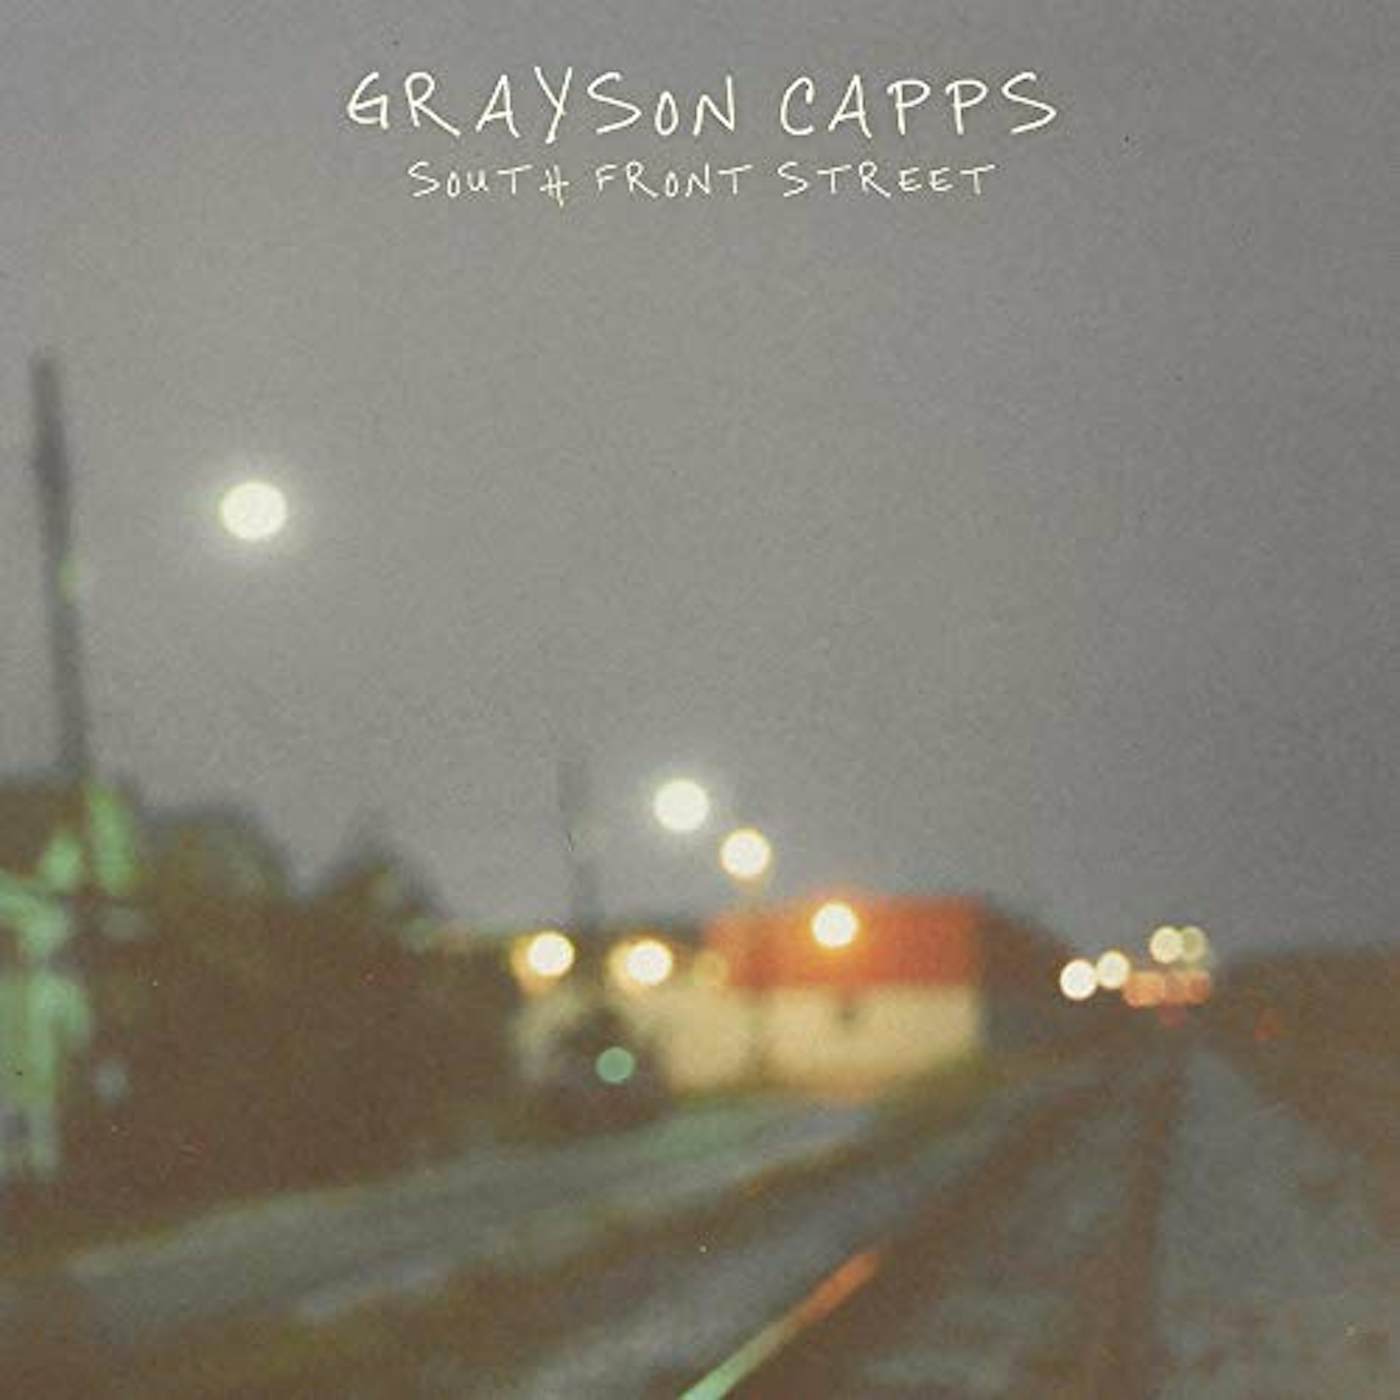 Grayson Capps South Front Street Vinyl Record